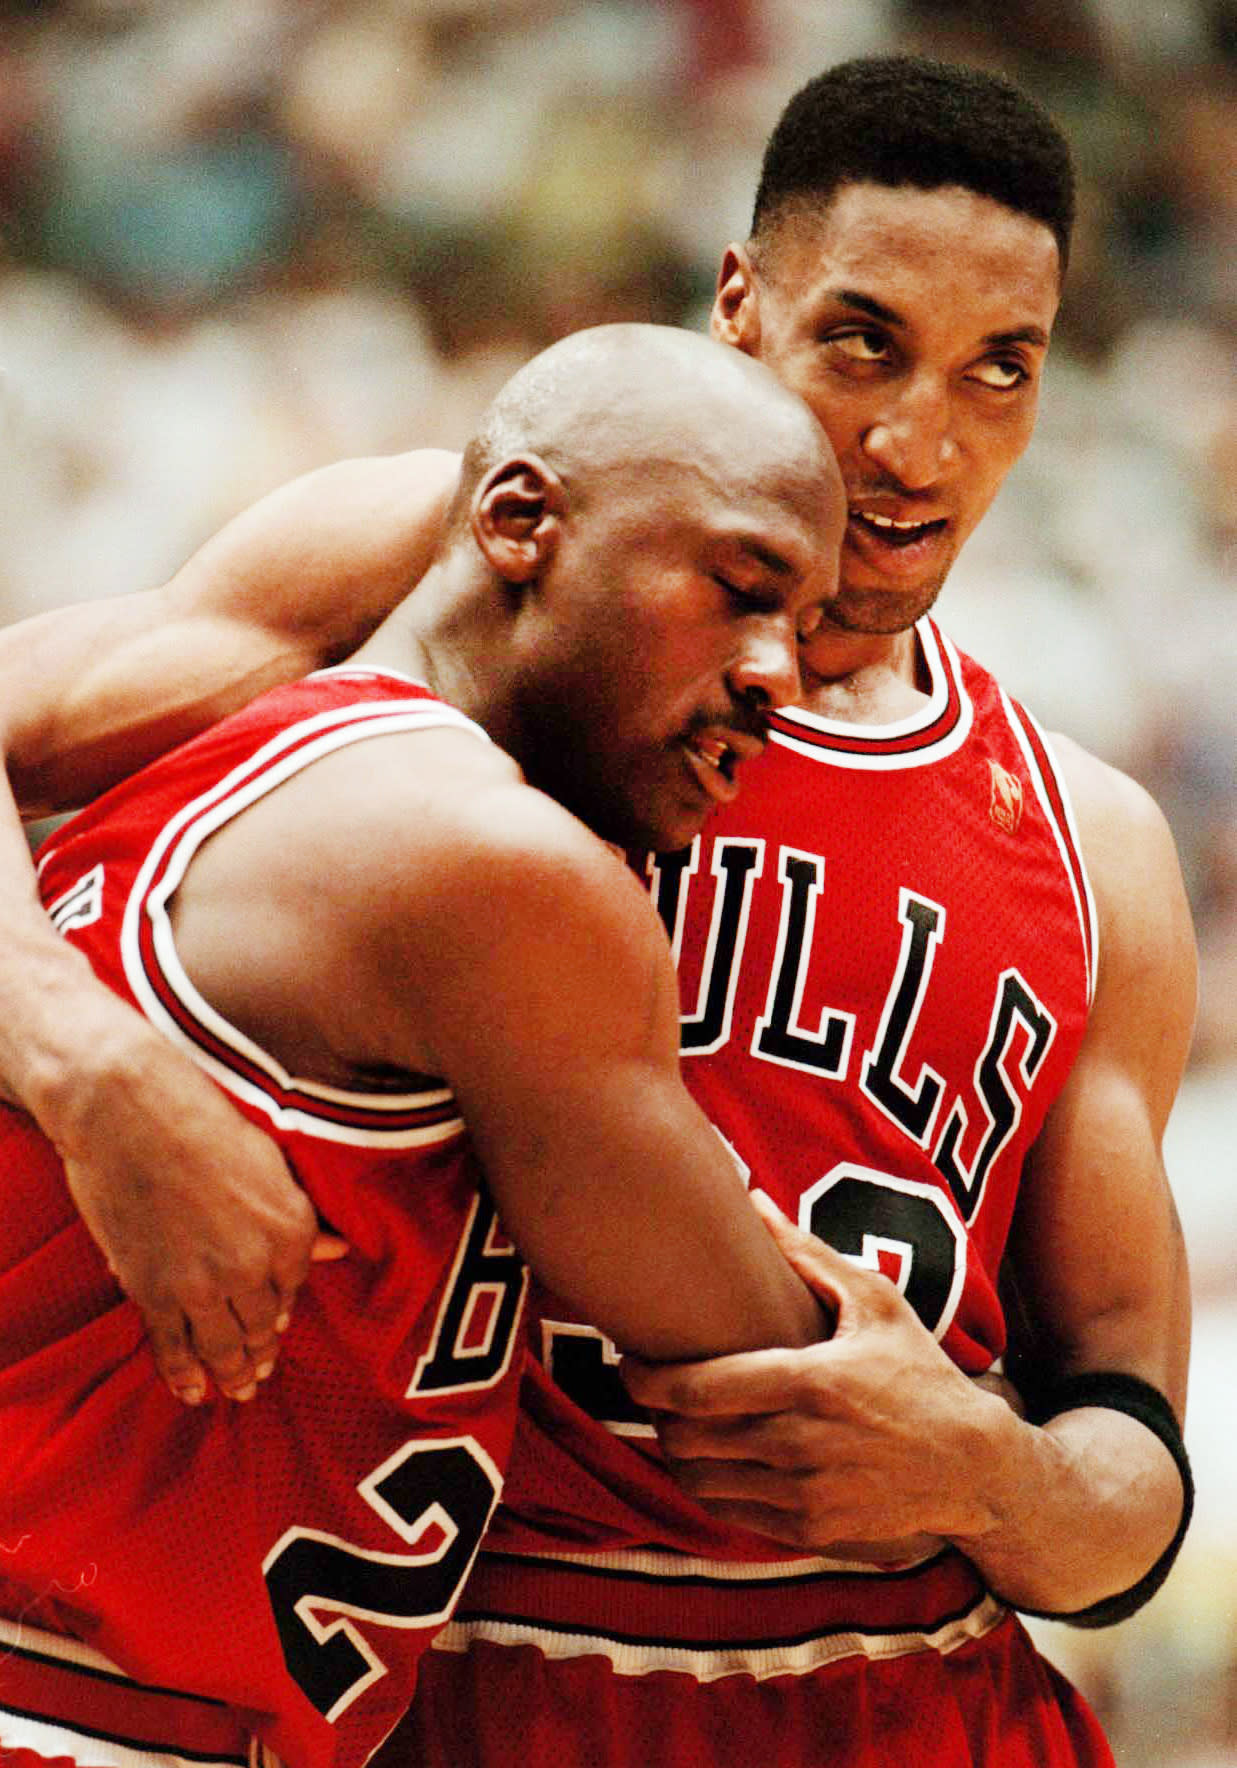 Jordan collapsed into Scottie Pippen's arms as he walked off the court during a late timeout, a sleepless night before thanks to some bad pizza in his rearview mirror and another clutch, courageous performance in his making on June 11, 1997. He finished with 38 points, seven rebounds, five assists and three steals, not to mention the game-clinching 3-pointer in his leg-wearying 44th minute. The crucial Game 5 road victory prevented the Jazz from sweeping three straight home games. Two nights later, the Bulls closed out their fifth title at the United Center. (Nuccio DiNuzzo/Chicago Tribune/Tribune News Service via Getty Images)